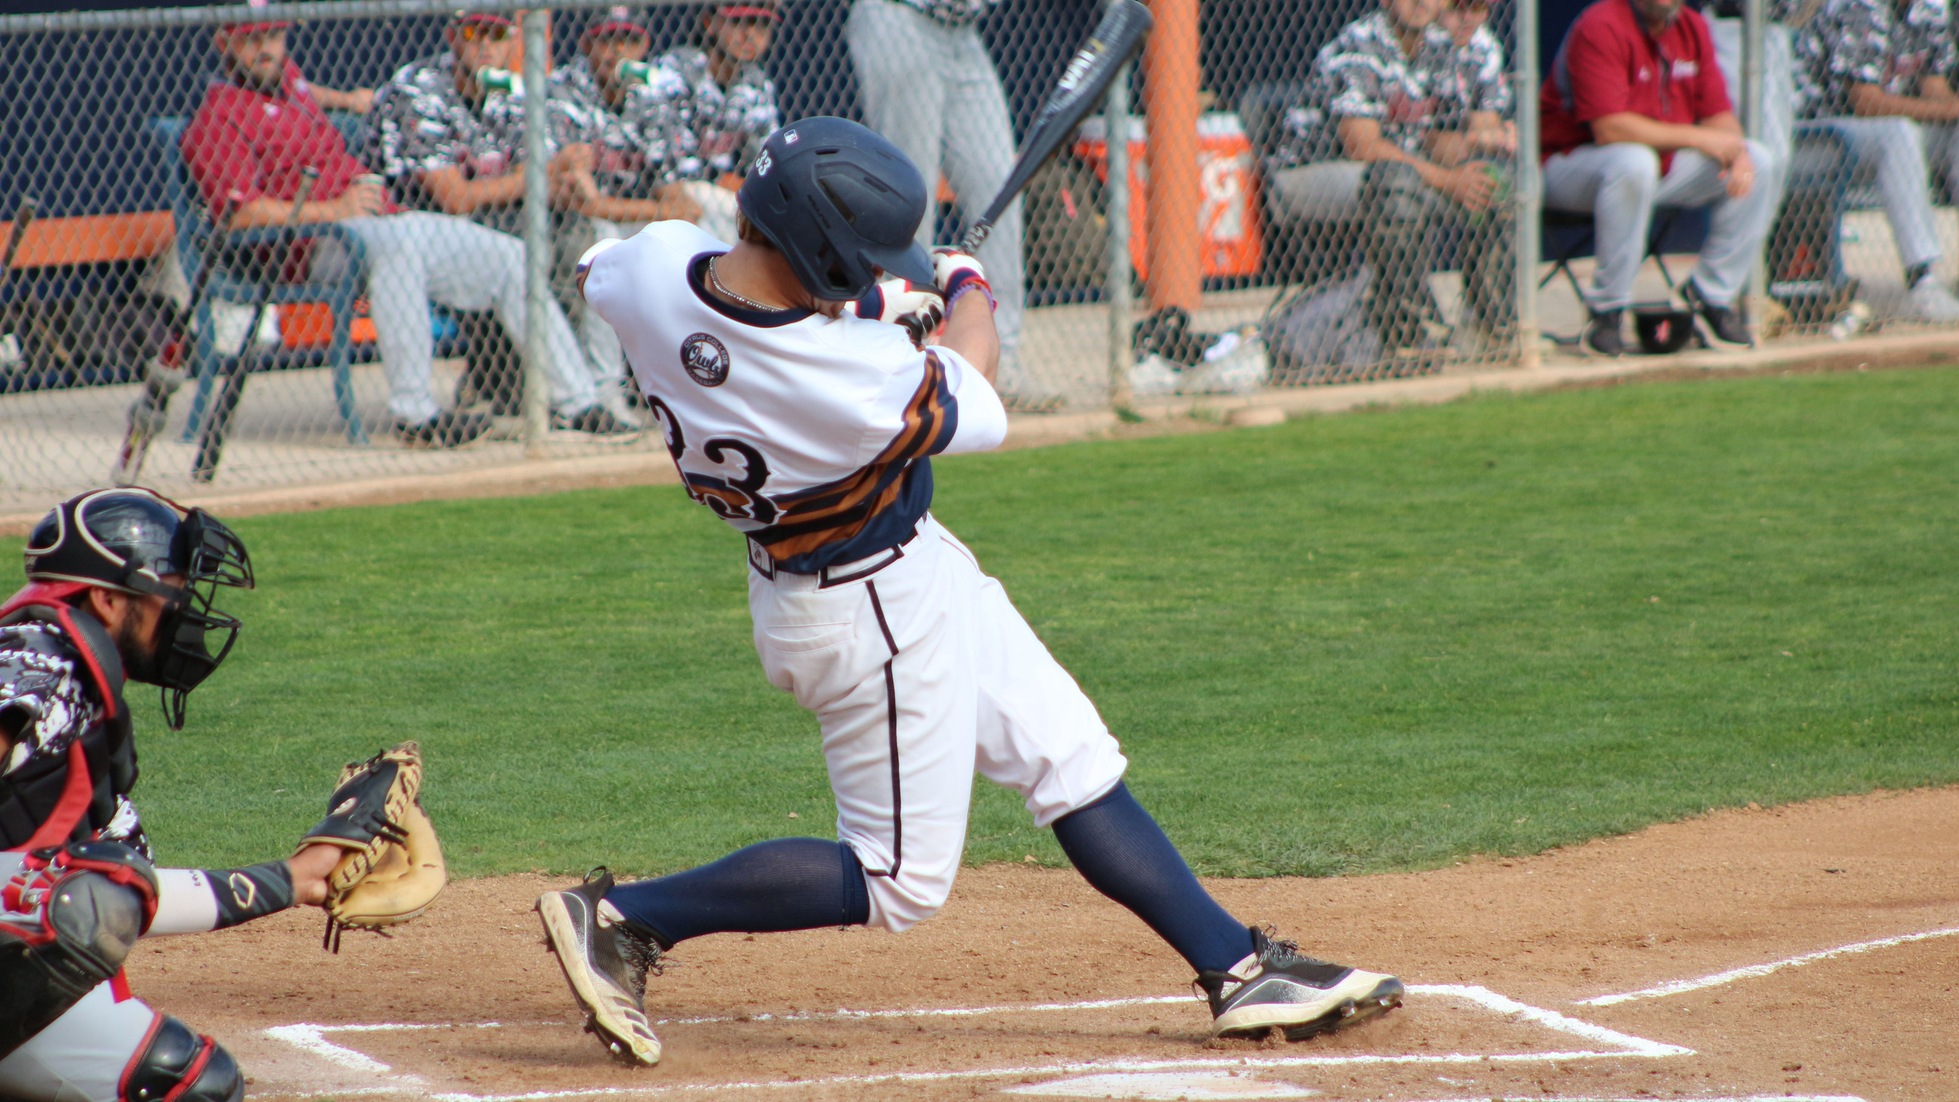 Brett Bowers went 2-for-3 at the plate against San Diego City. Photo by: Brianna Jara